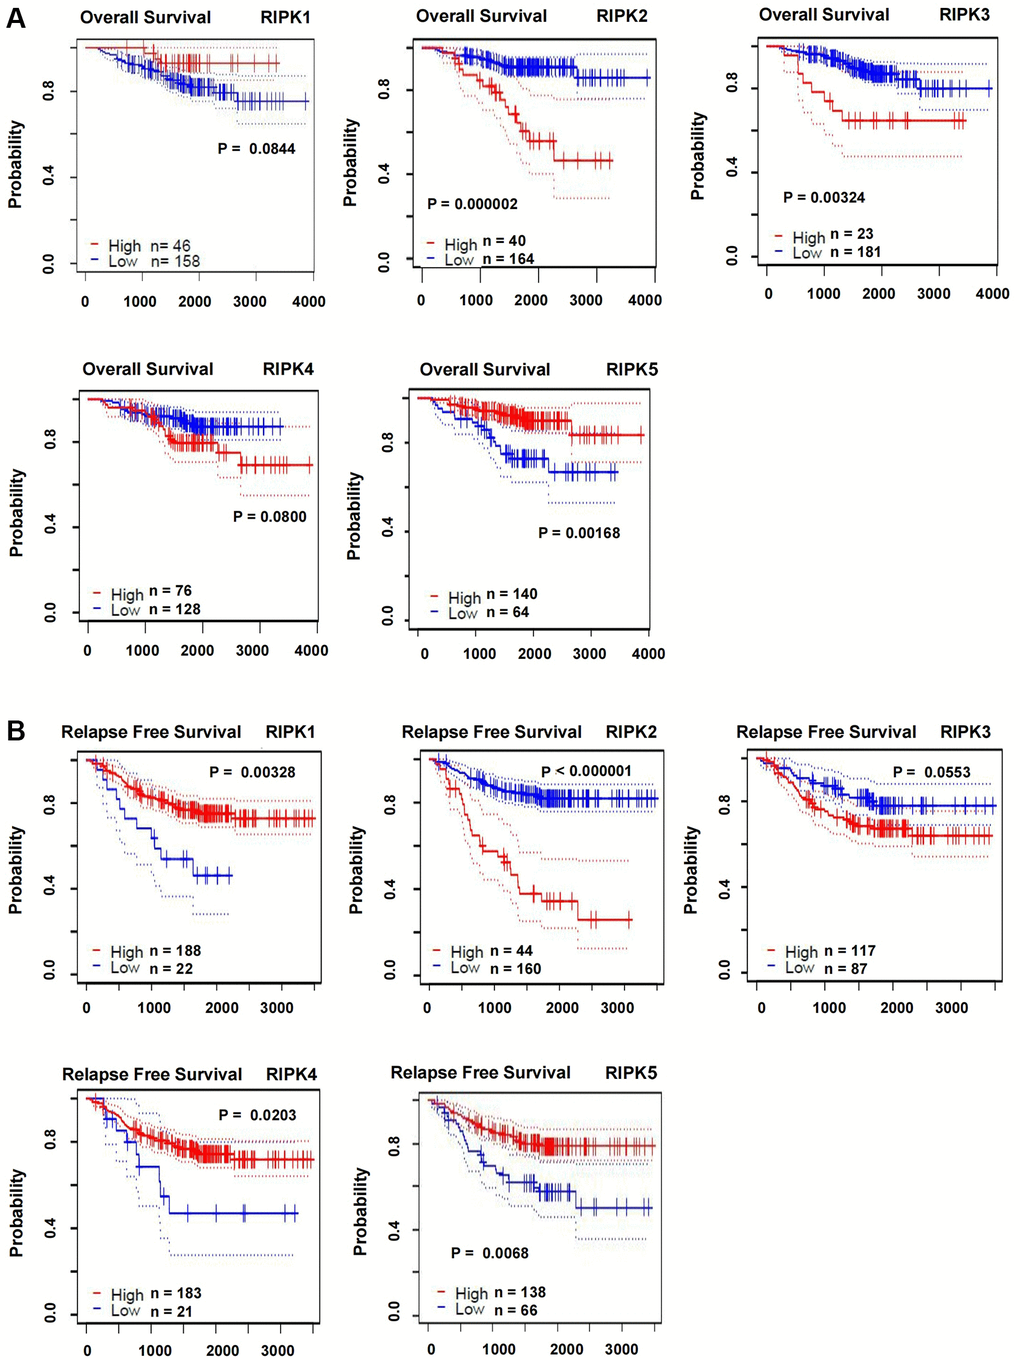 The correlations of RIPK family expression with OS and RSF in LUAD patients. (A) Kaplan-Meier plotter was used to assess the correlation of RIPK family members with the patients’ OS. (B) The correlations of RIPK family expression with RFS in LUAD patients.